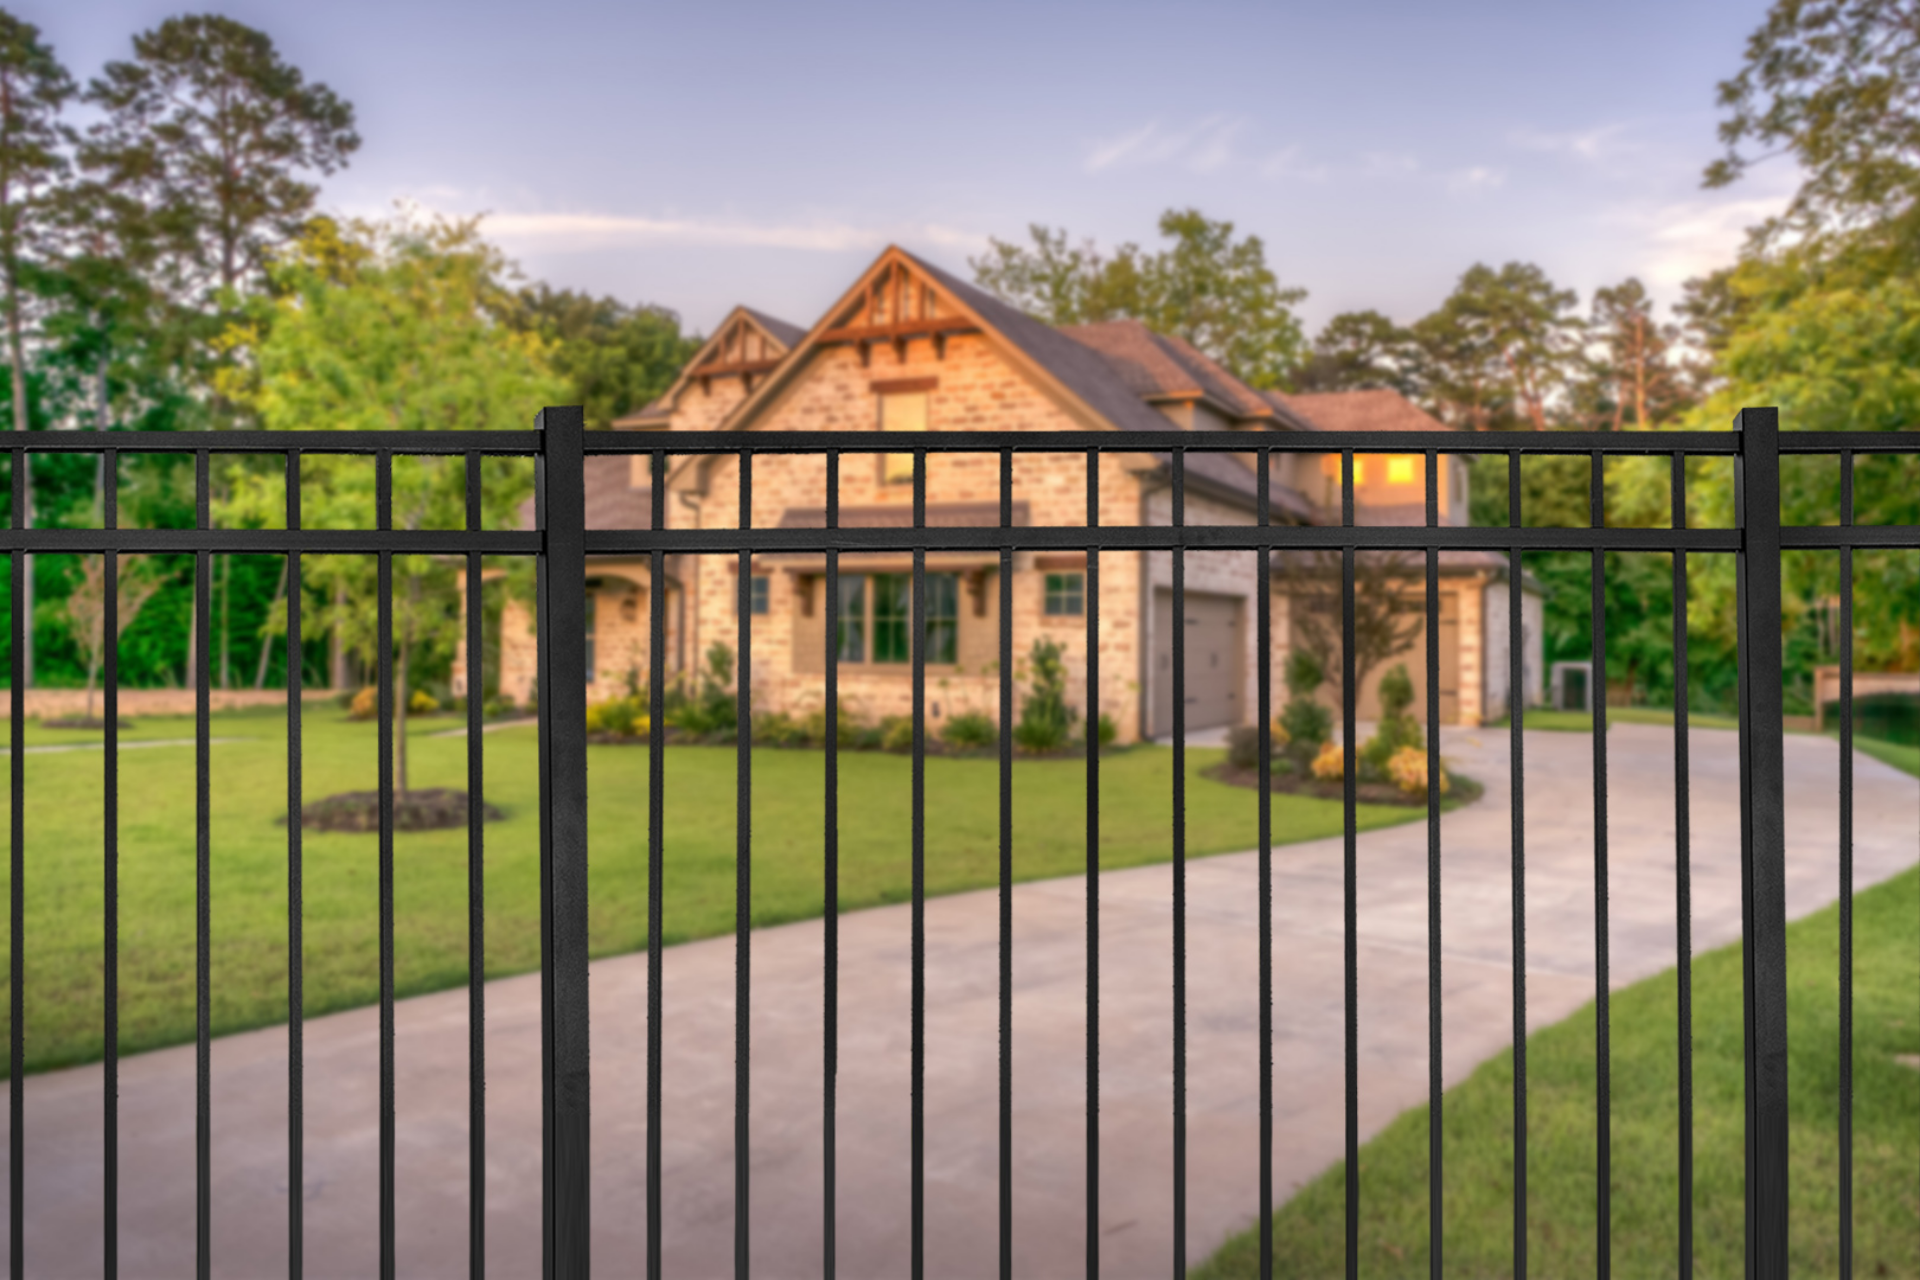 Steel fence in front of a residential property with a brick house and yard.